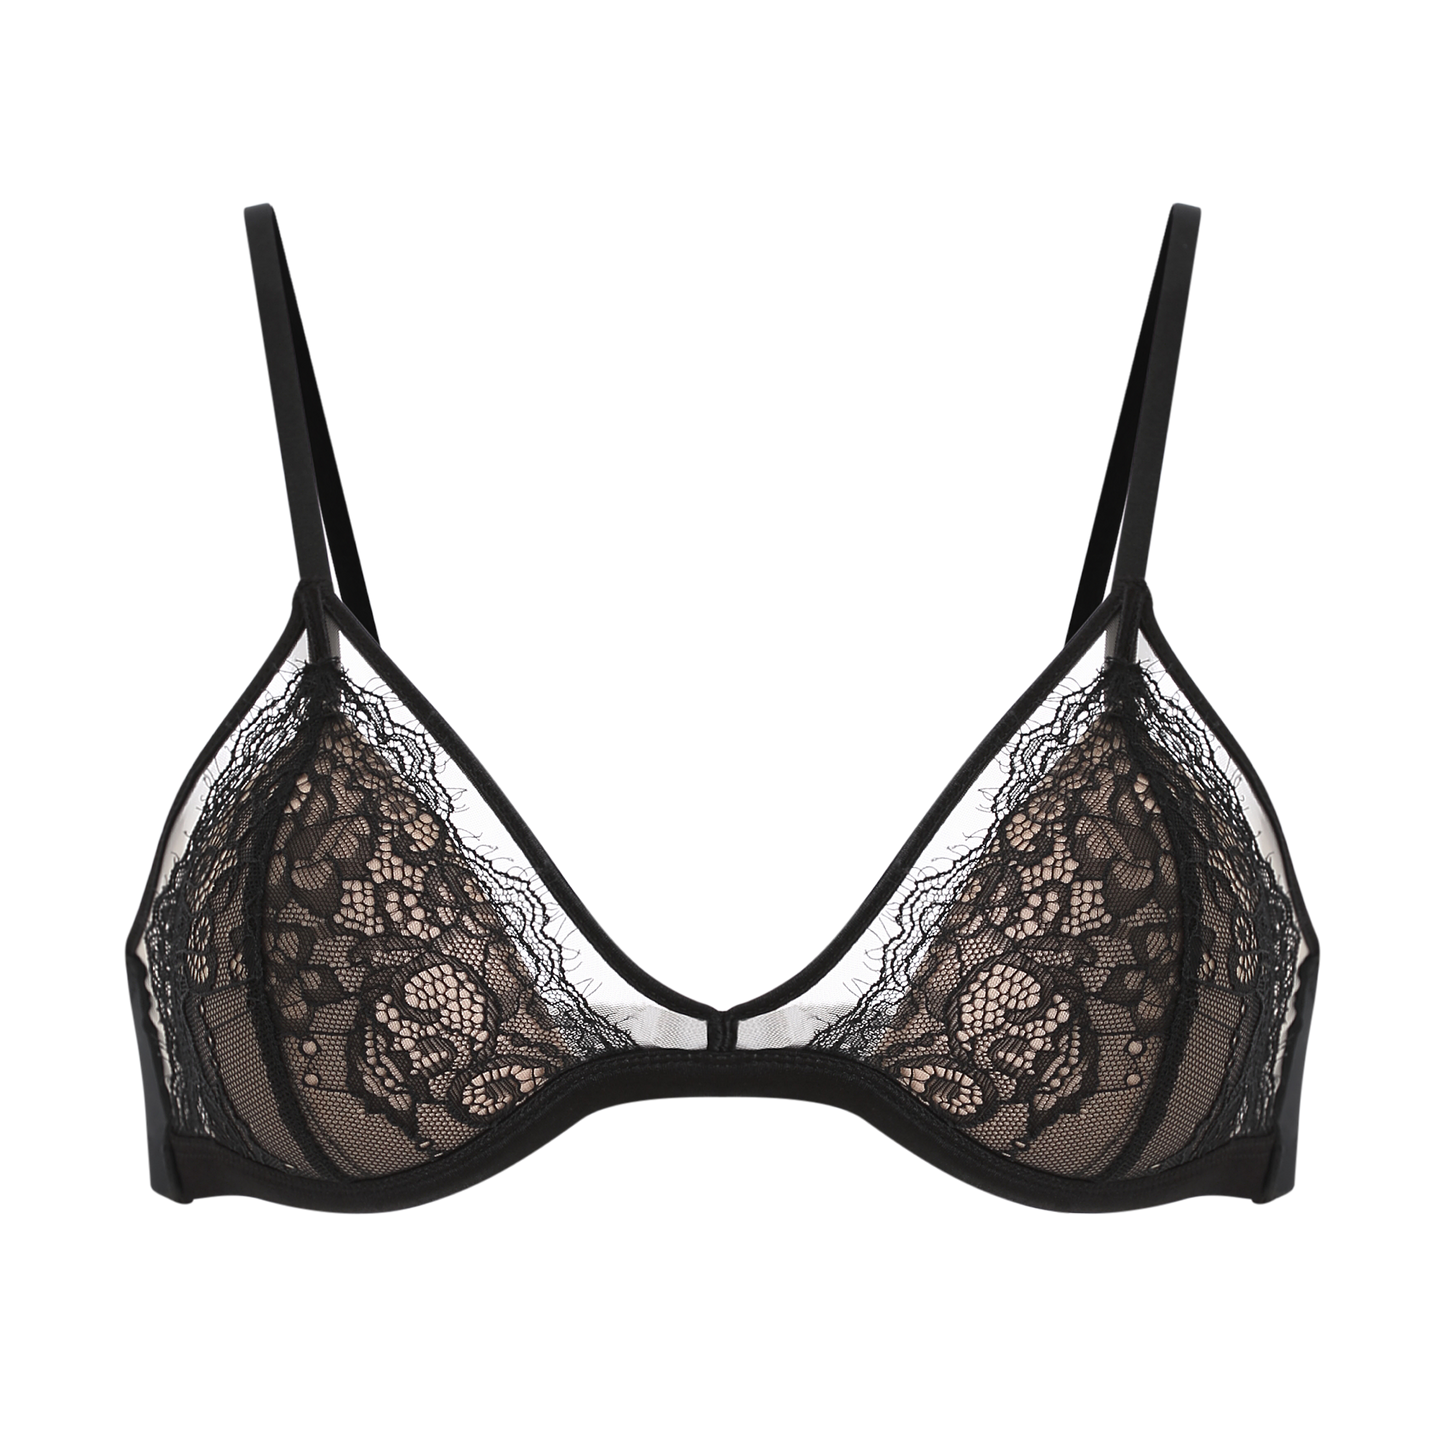 Elegant black lace bralette with a sheer floral design, featuring adjustable straps and a soft, comfortable fit, made from 100% polyester cup lining and 86% nylon, 14% spandex side wing lining.